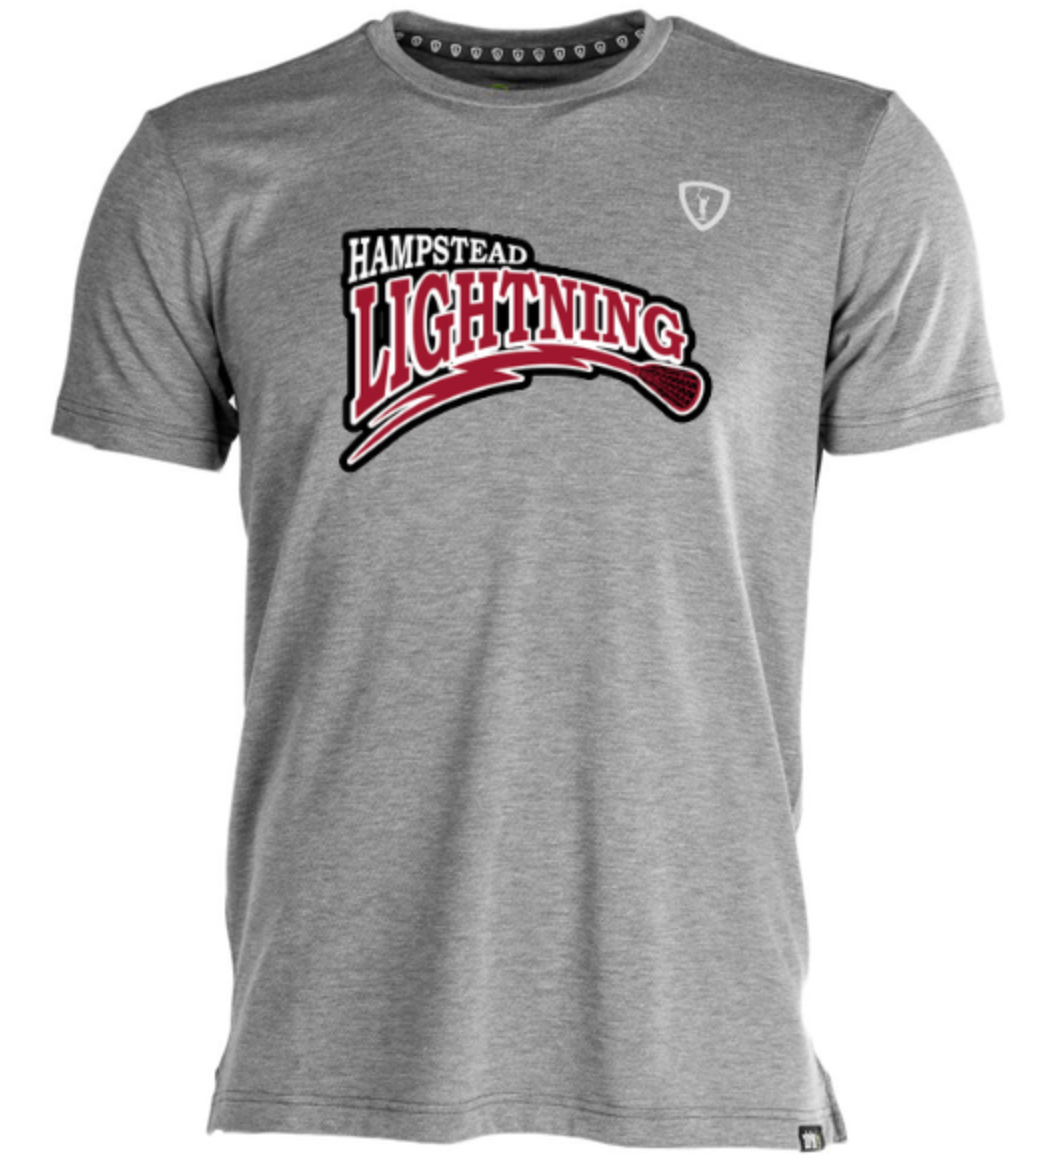 ADRENALINE LACROSSE ANYTIME PERFORMANCE ADULT / YOUTH TEE SHIRT